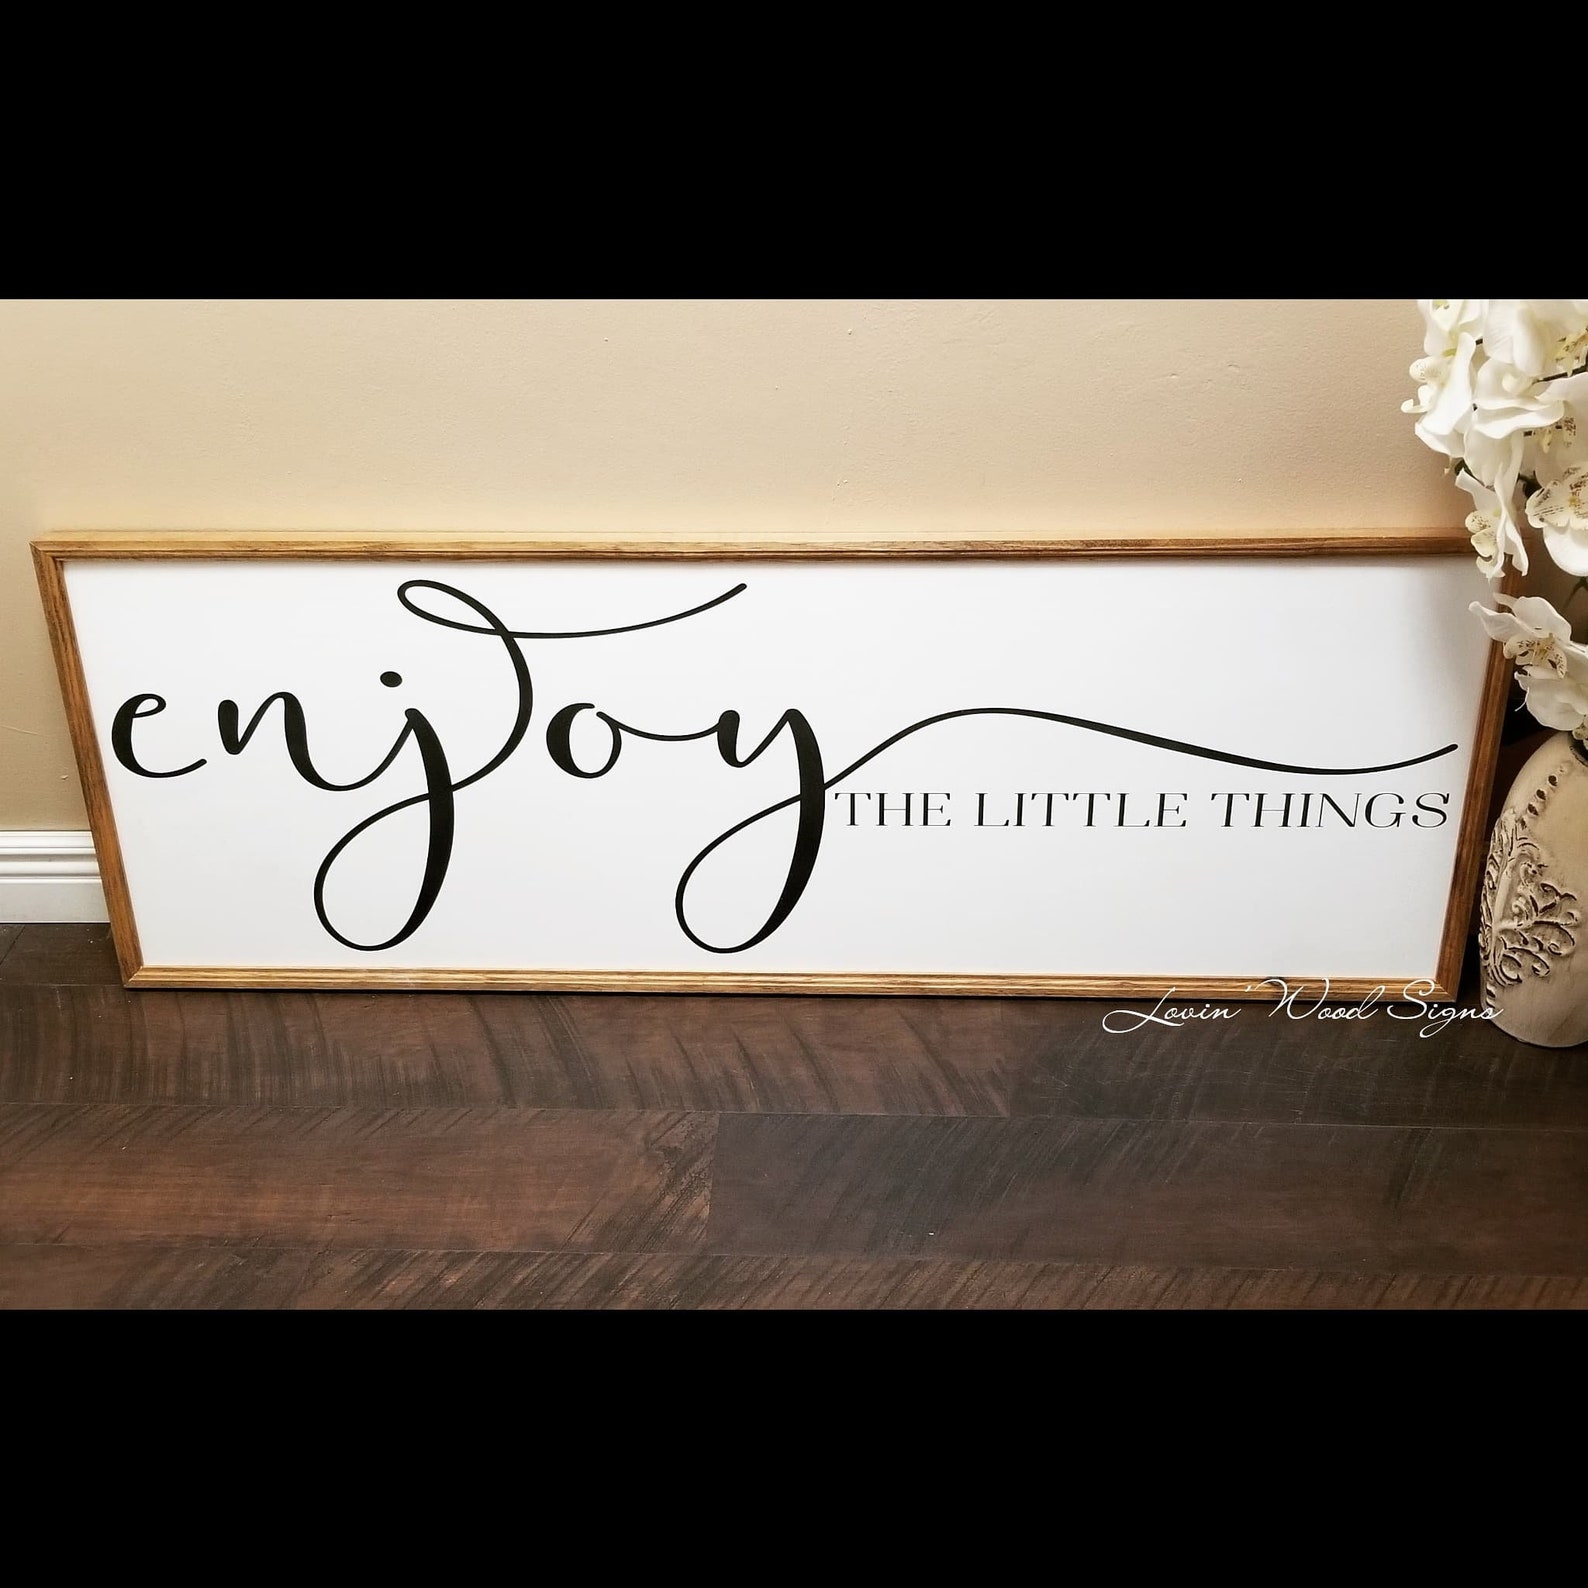 Enjoy the Little Things Sign Enjoy the Little Things Bedroom | Etsy